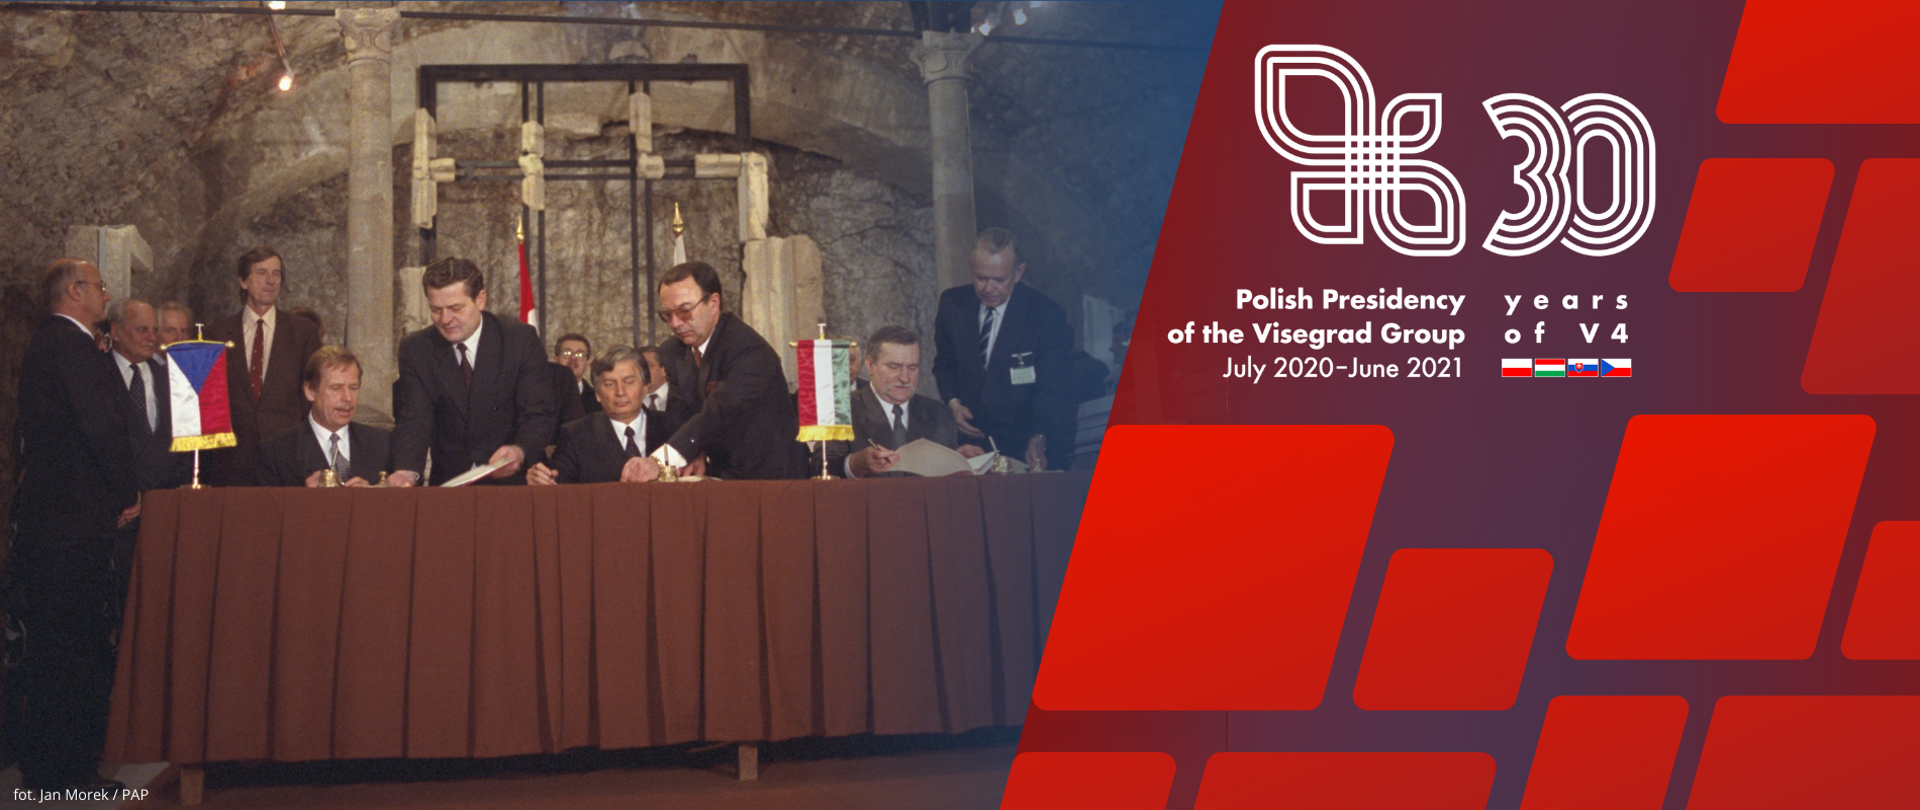 30th anniversary of the Visegrad Group